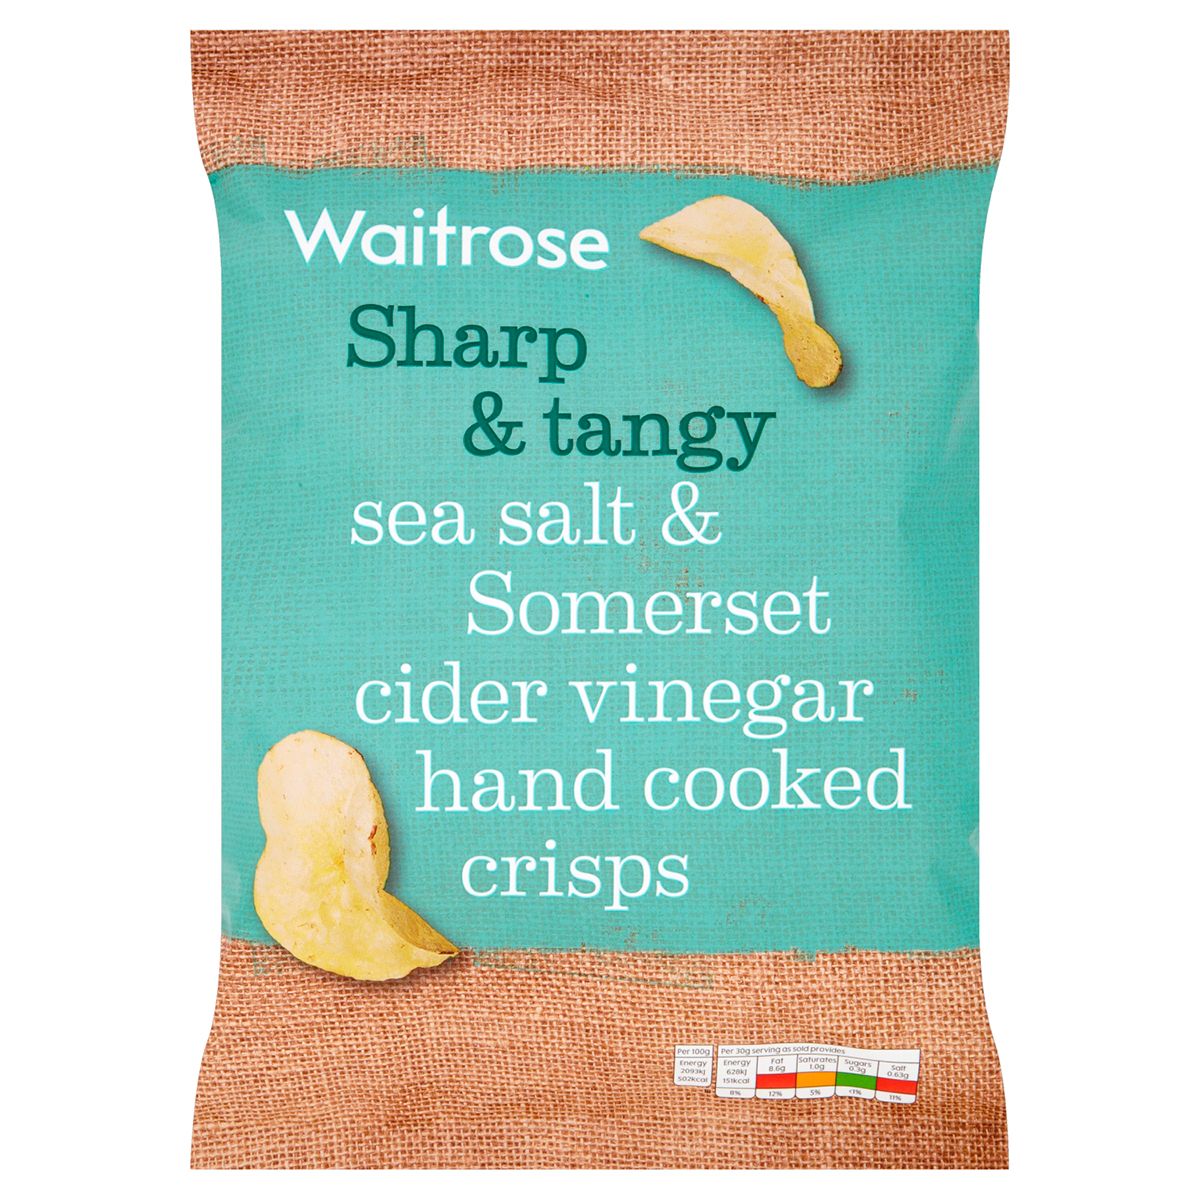 These are the UK's best salt and vinegar crisps according Martin